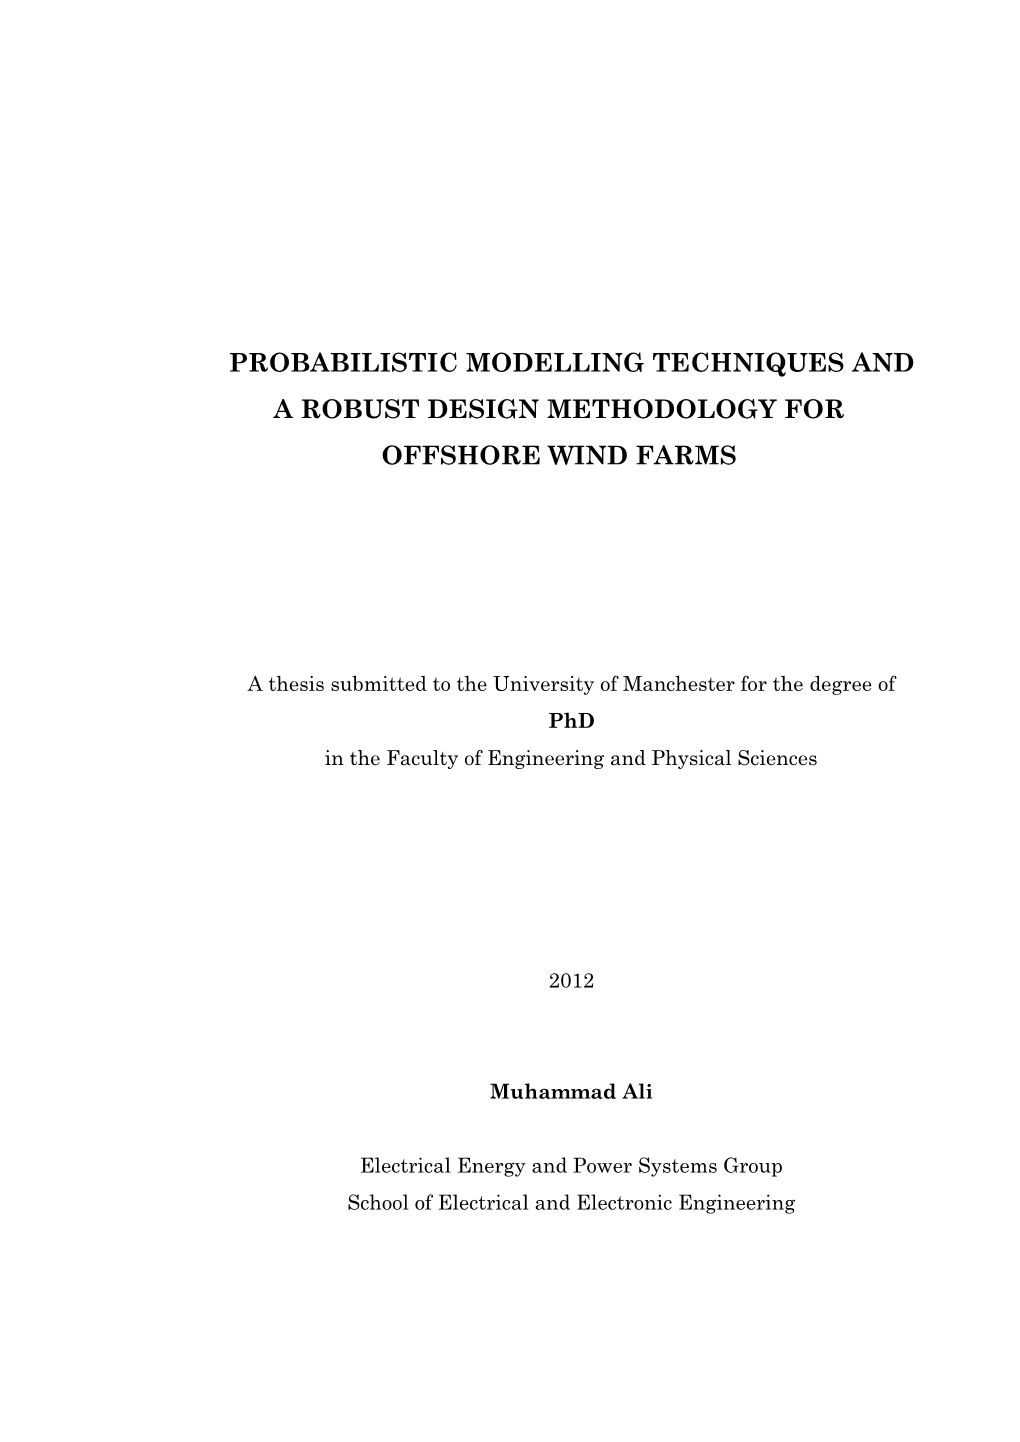 Probabilistic Modelling Techniques and a Robust Design Methodology for Offshore Wind Farms